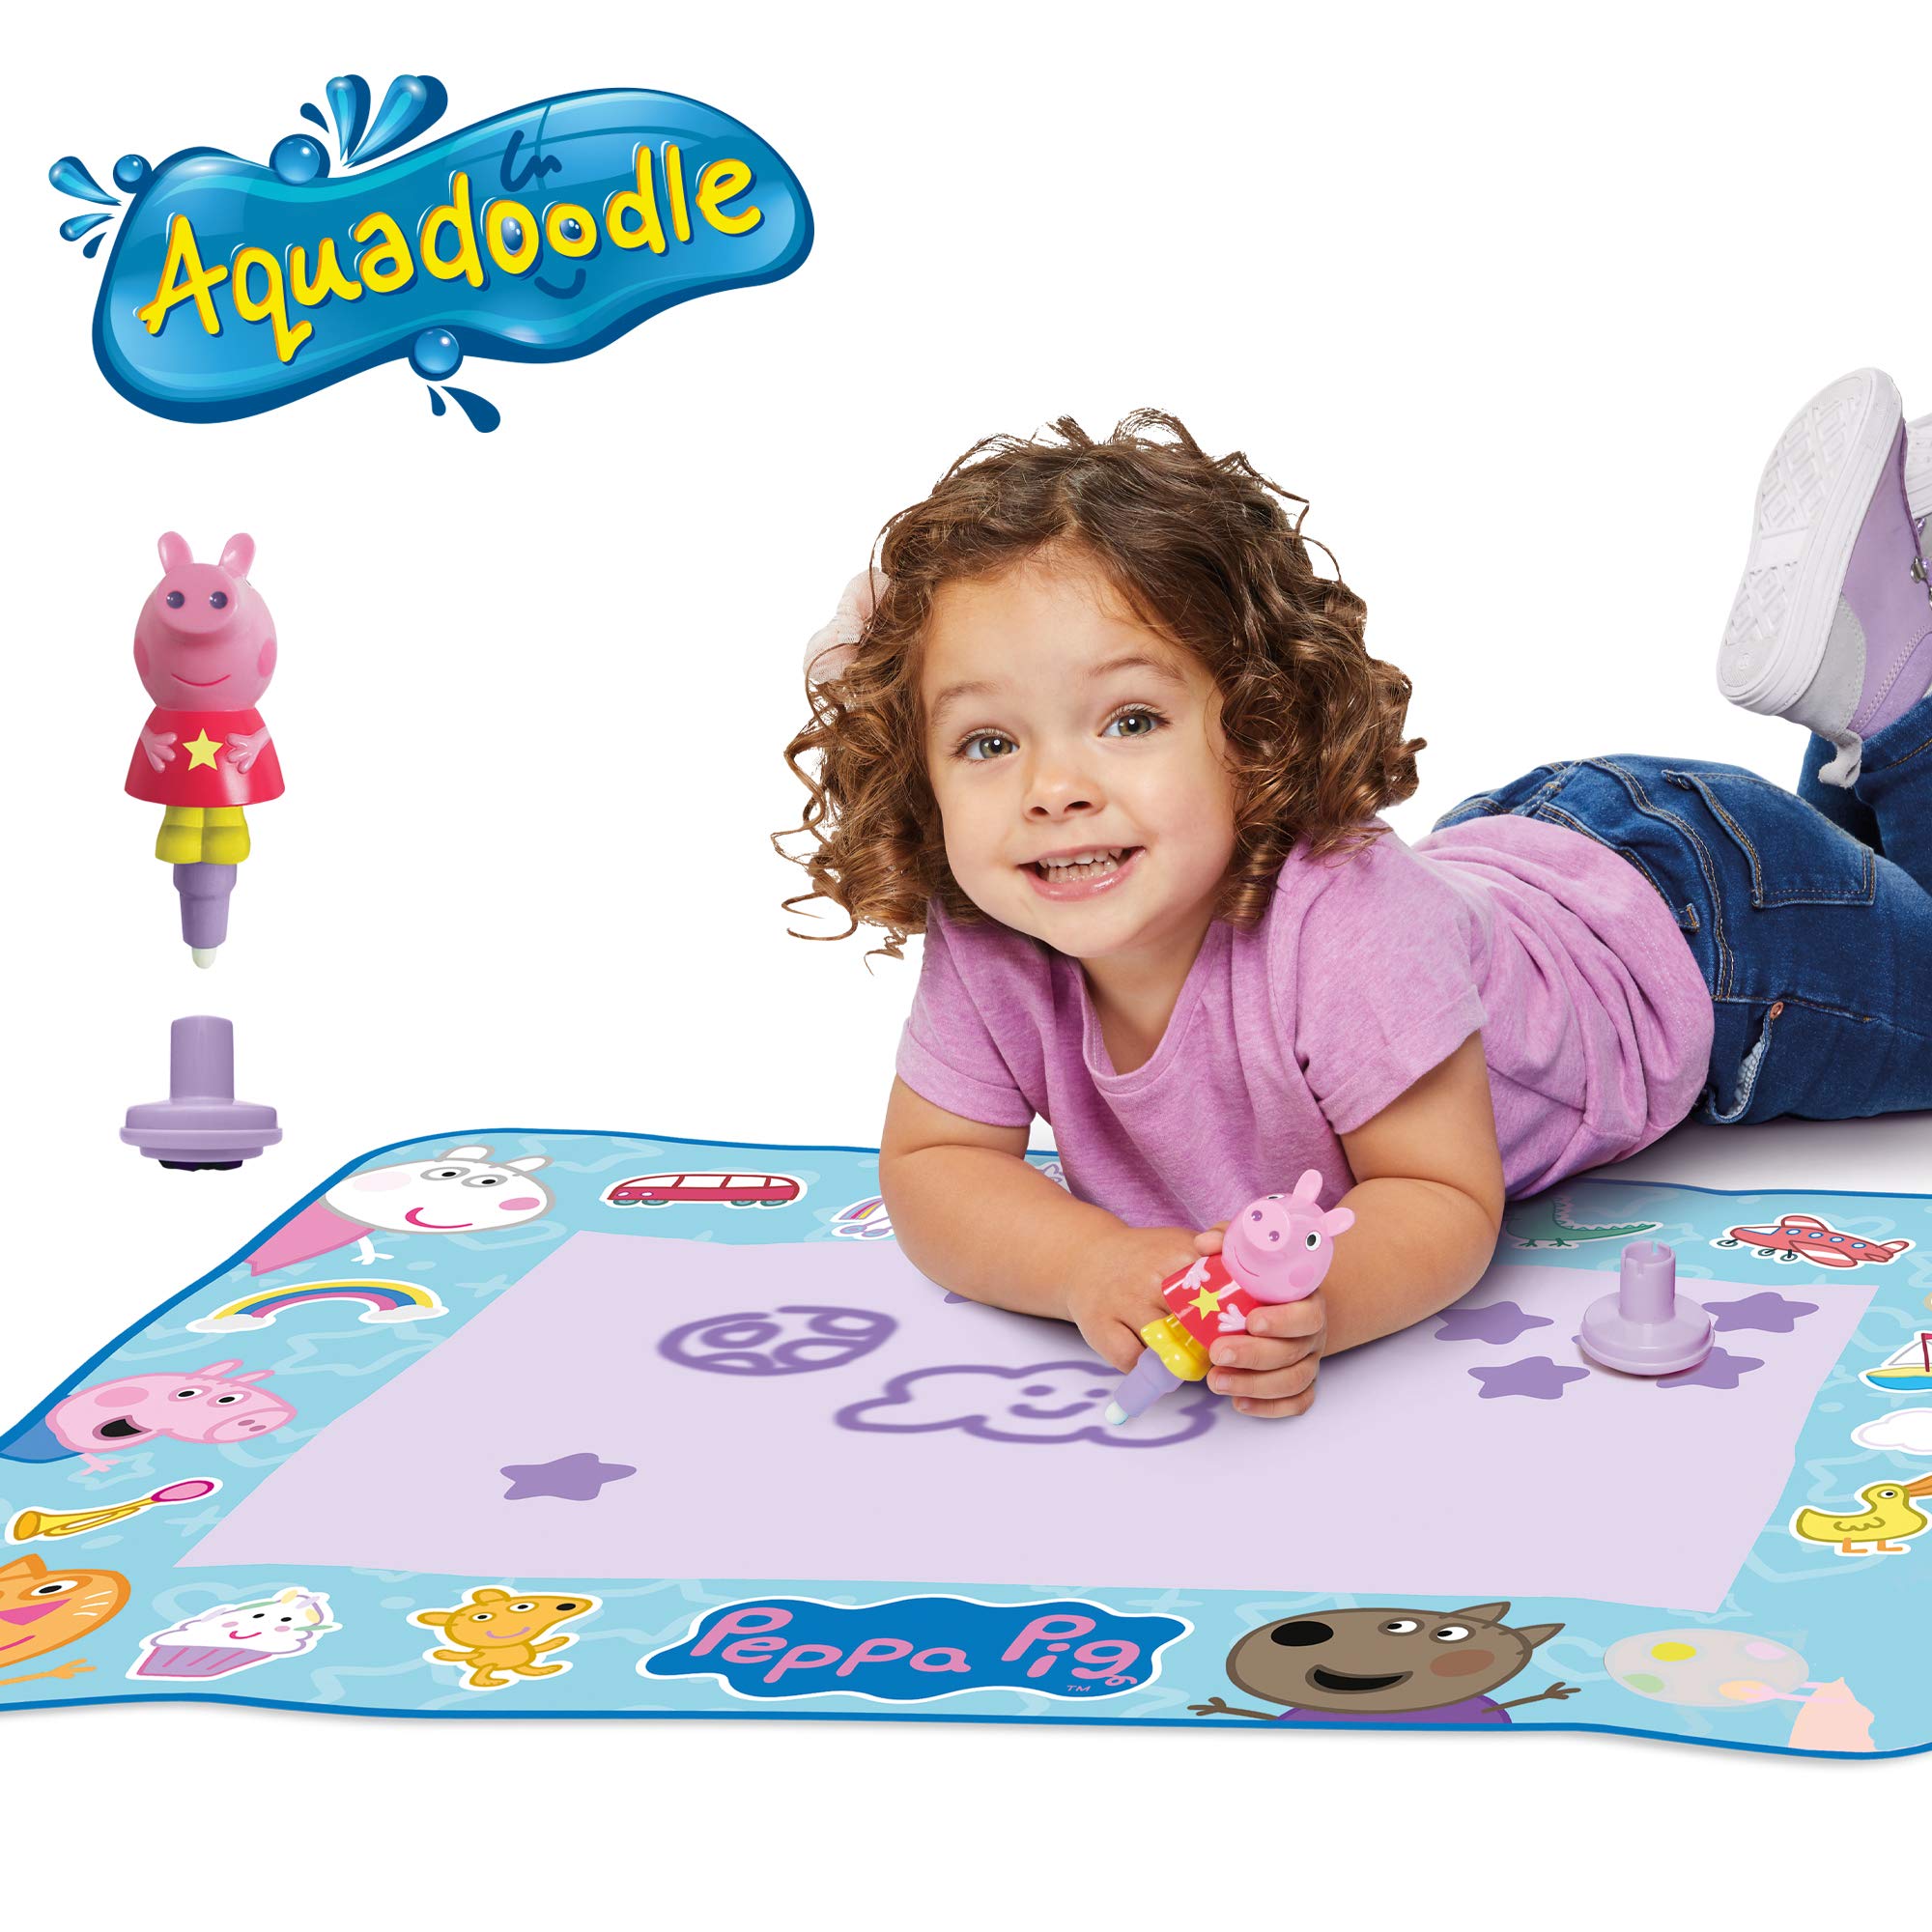 Peppa Pig Aquadoodle Water Doodle Mat-peppa pig house ideas for Kids